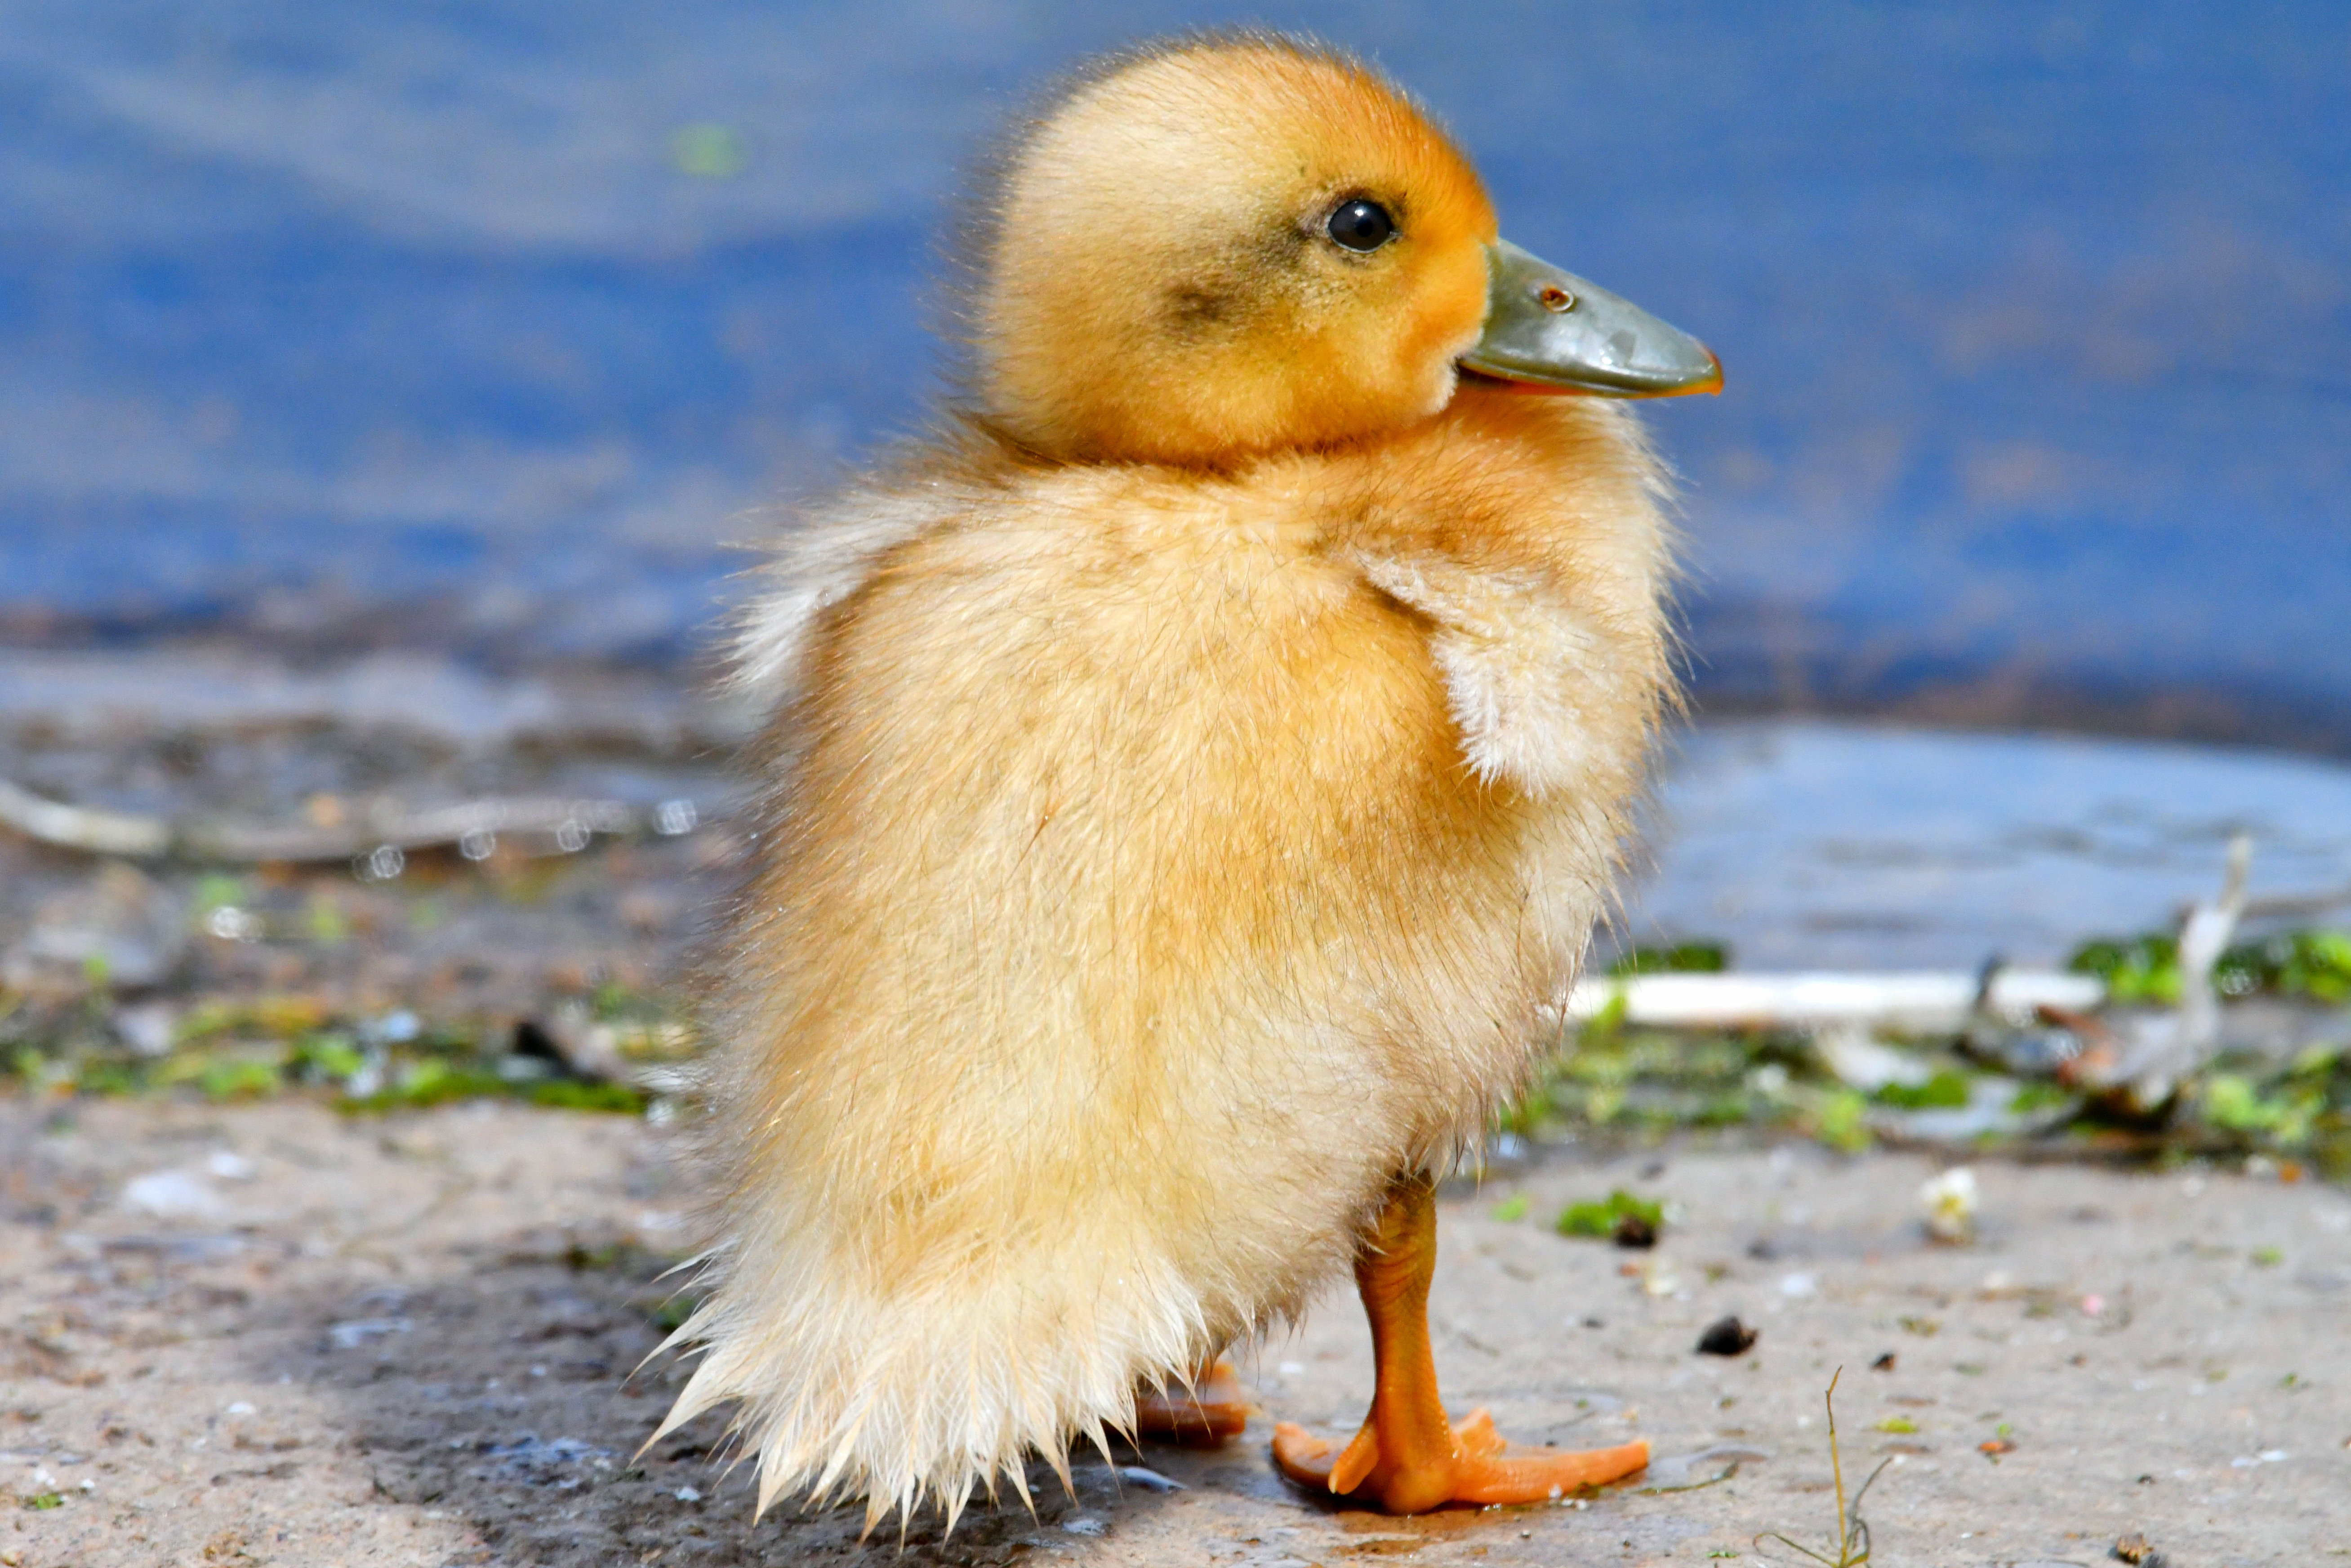 Duckling by the water